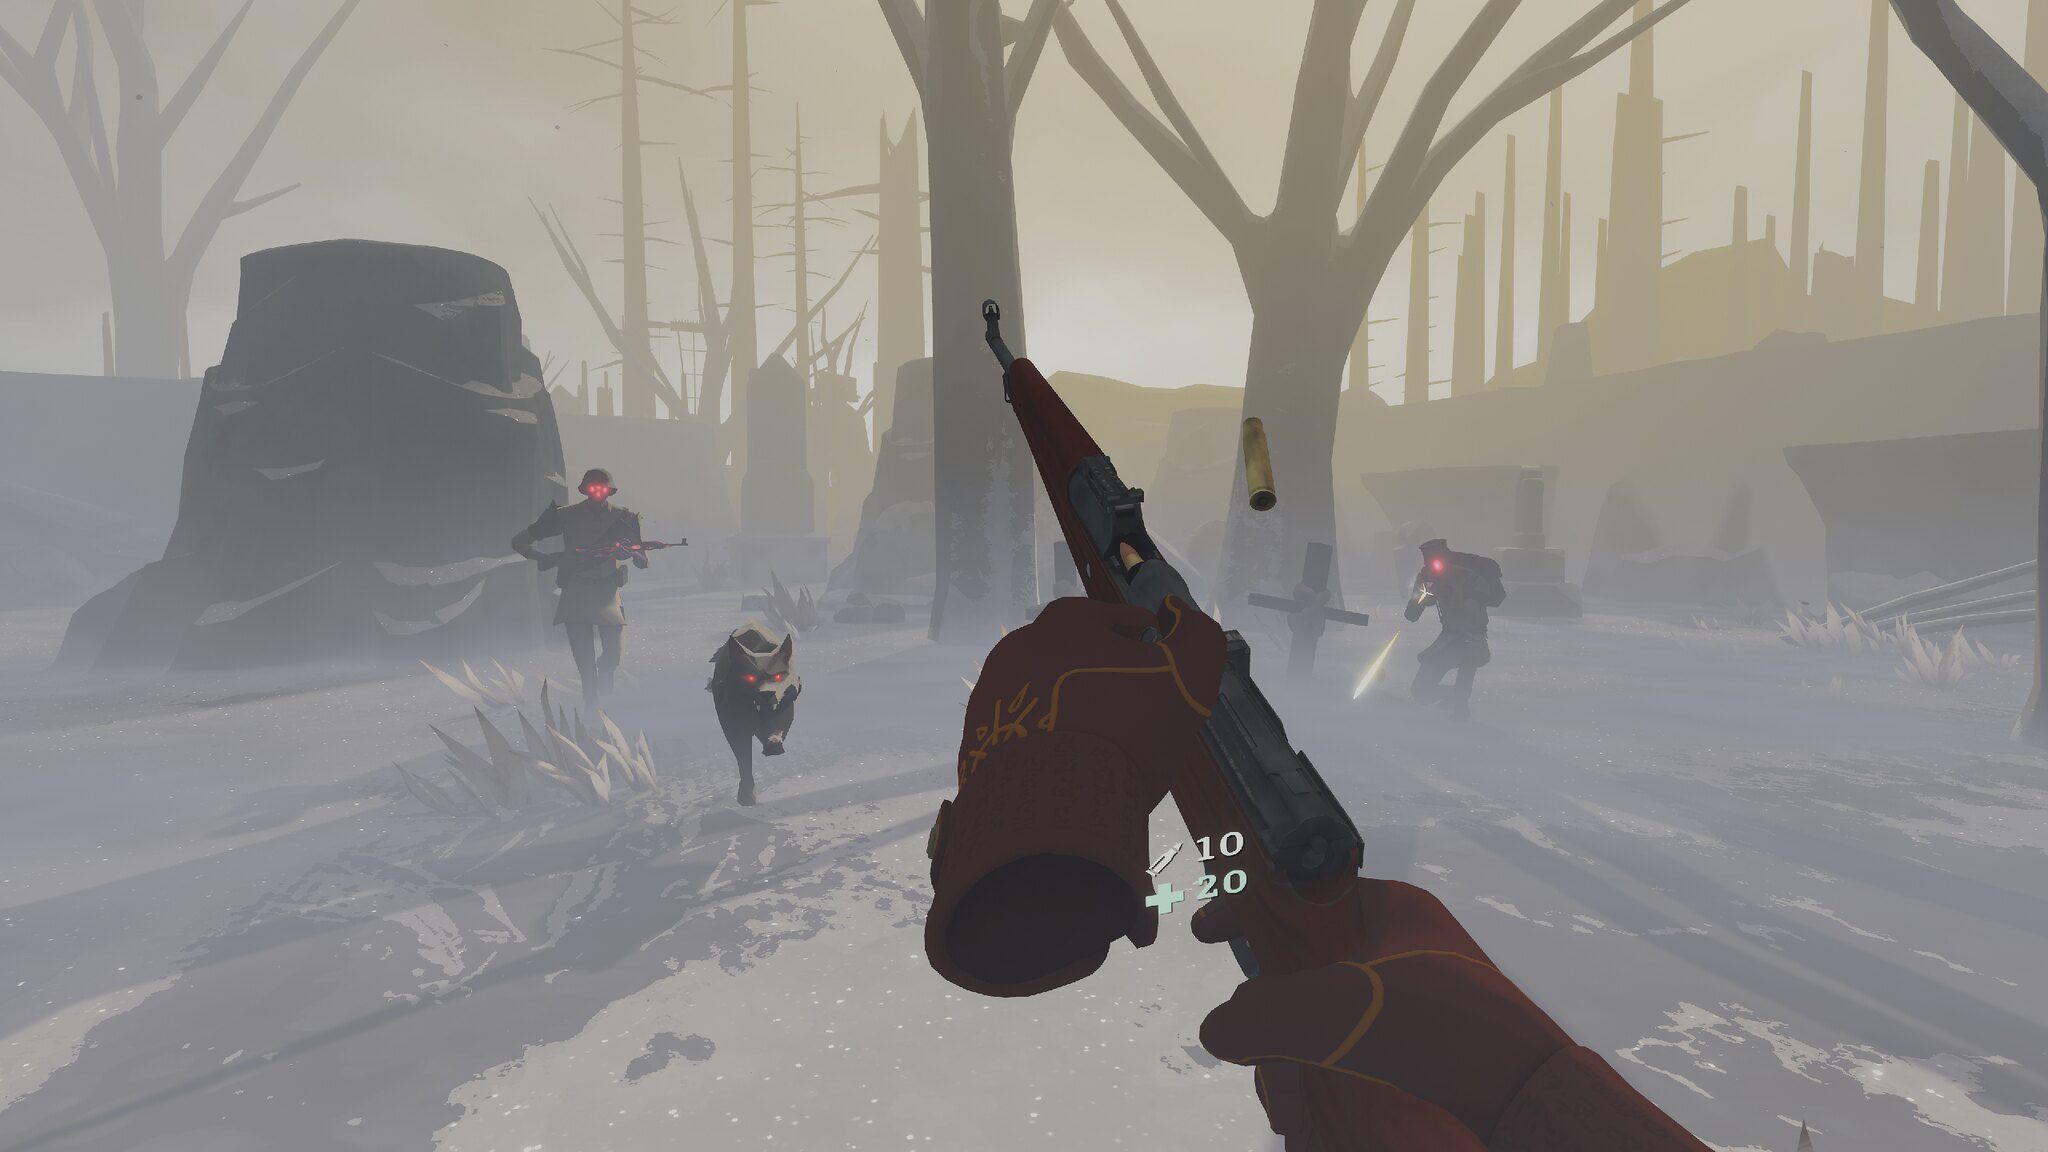 The Light Brigade brings a dark VR roguelike shooter to PS VR2, out February 22